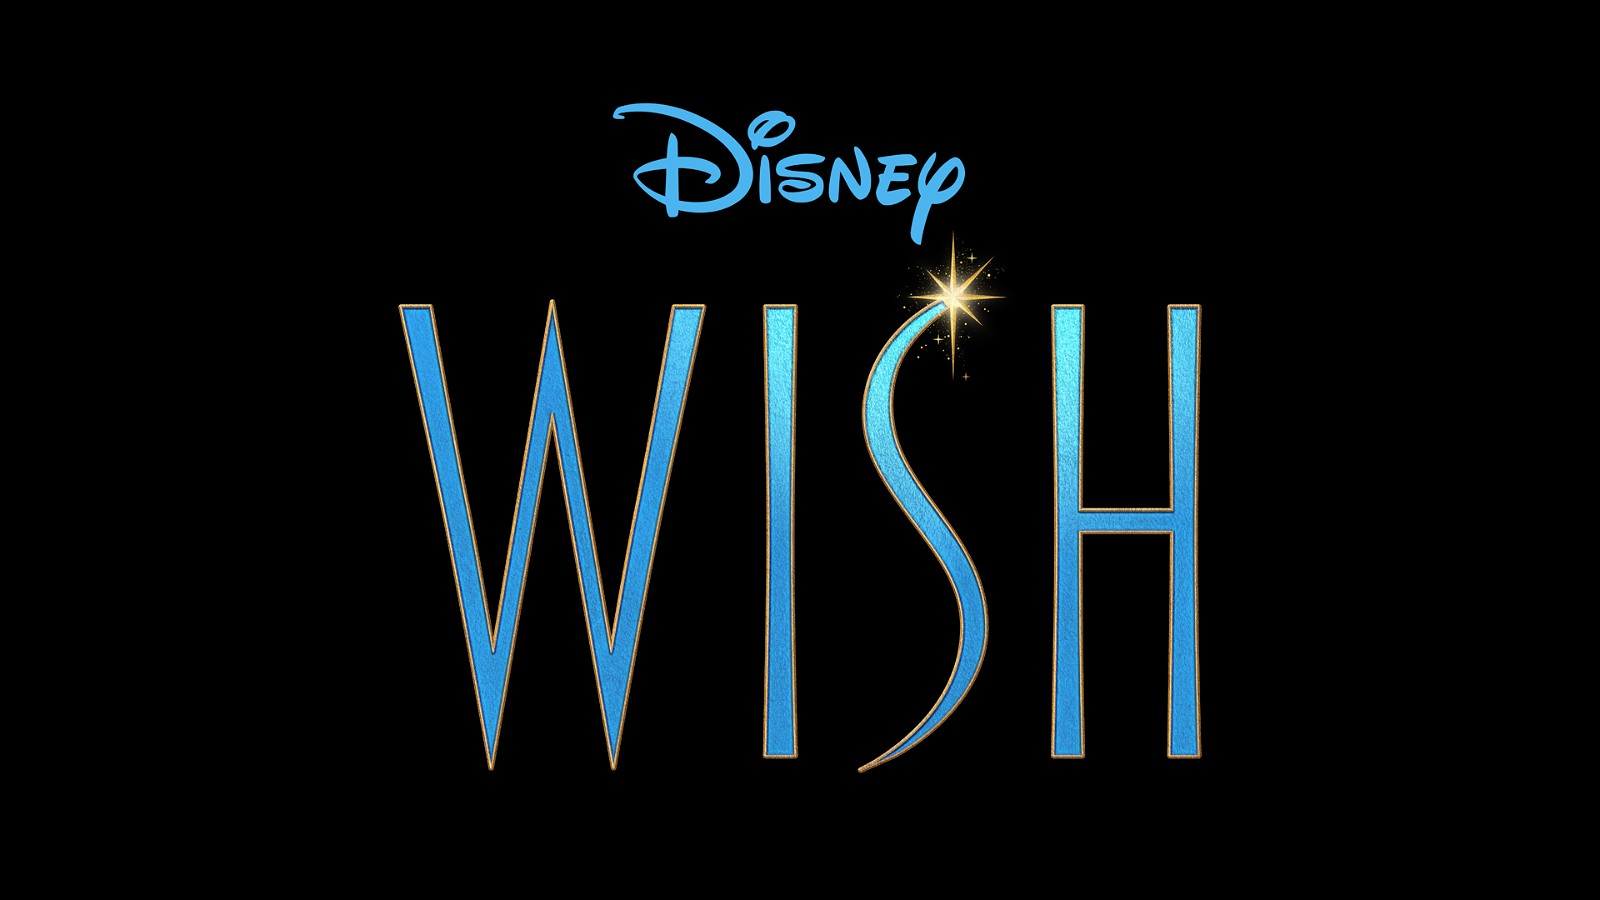 Disney announces the launch of a new animated musical titled Wish